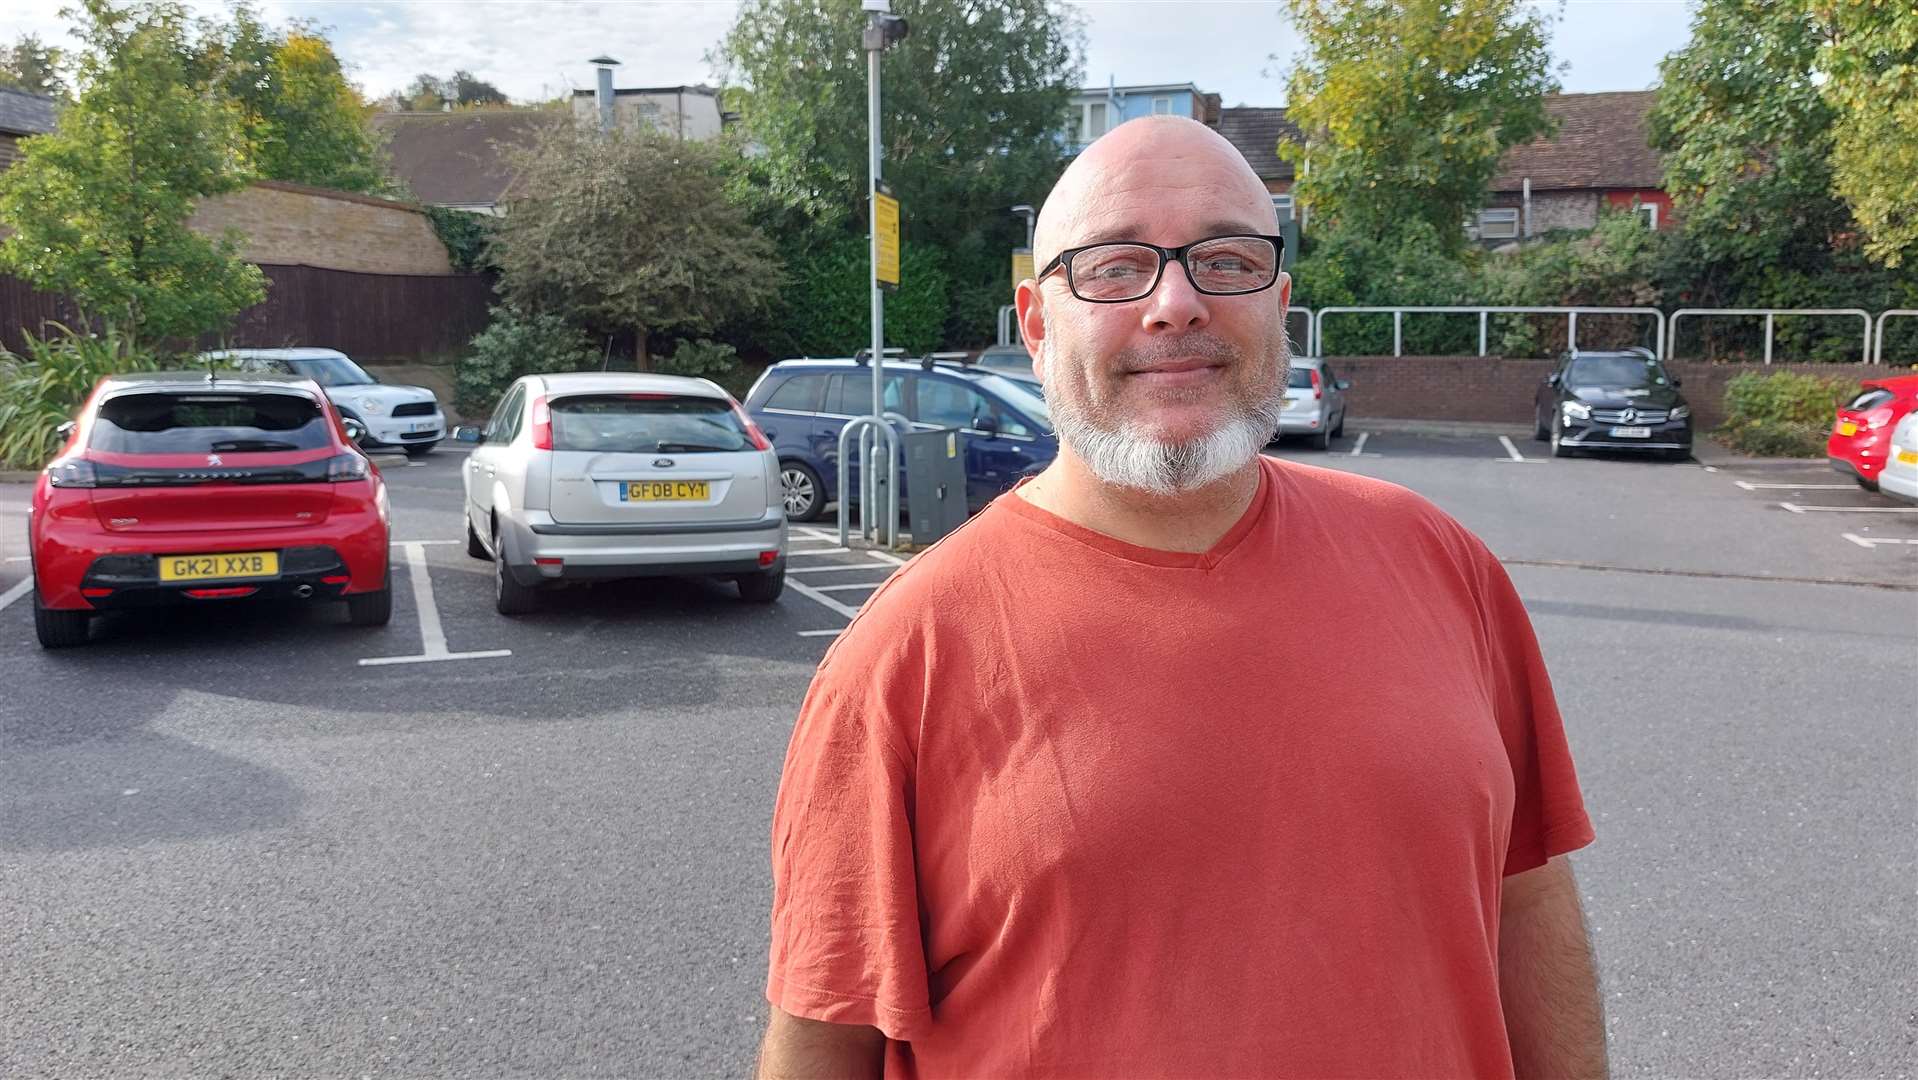 Paul Martin, 48, from Folkestone Road, thinks self-checkouts are a "good idea"